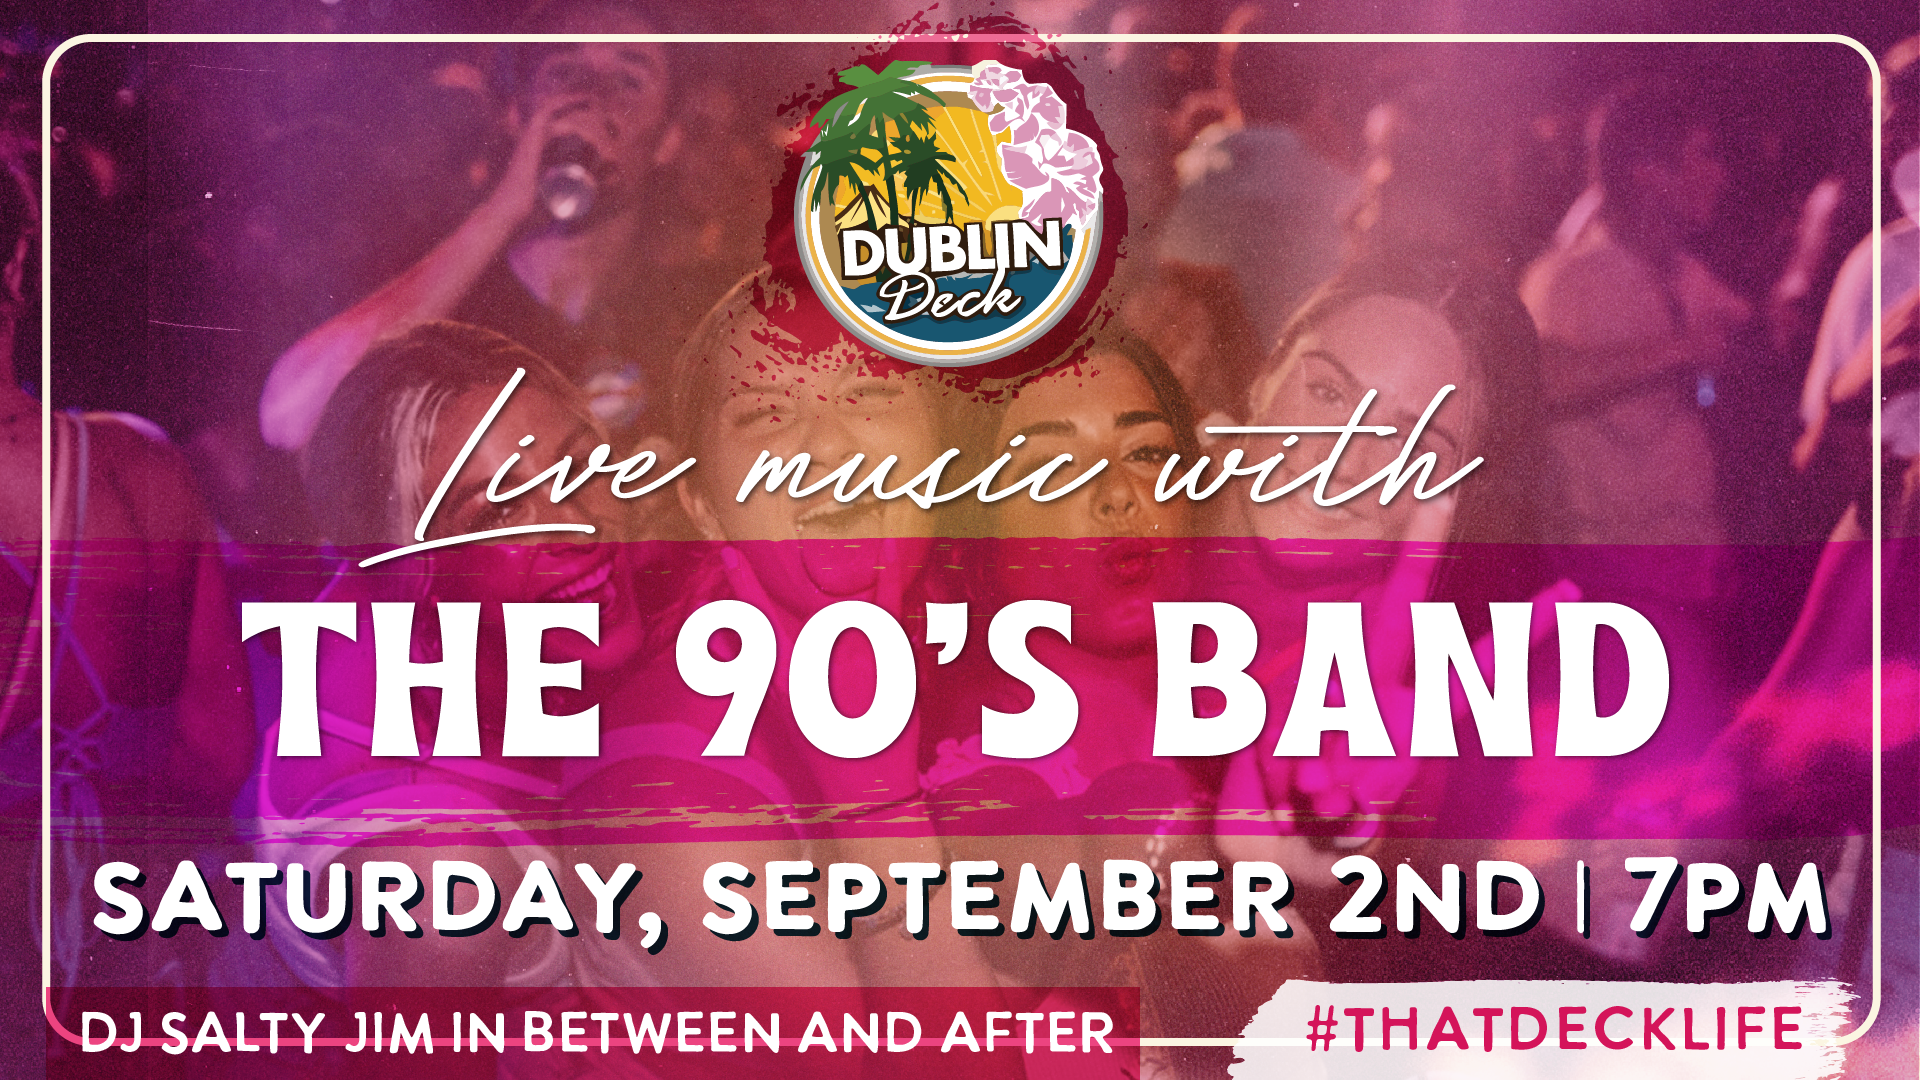 Spend your Saturday night with The 90's Band at Dublin Deck! Music starts at 7PM